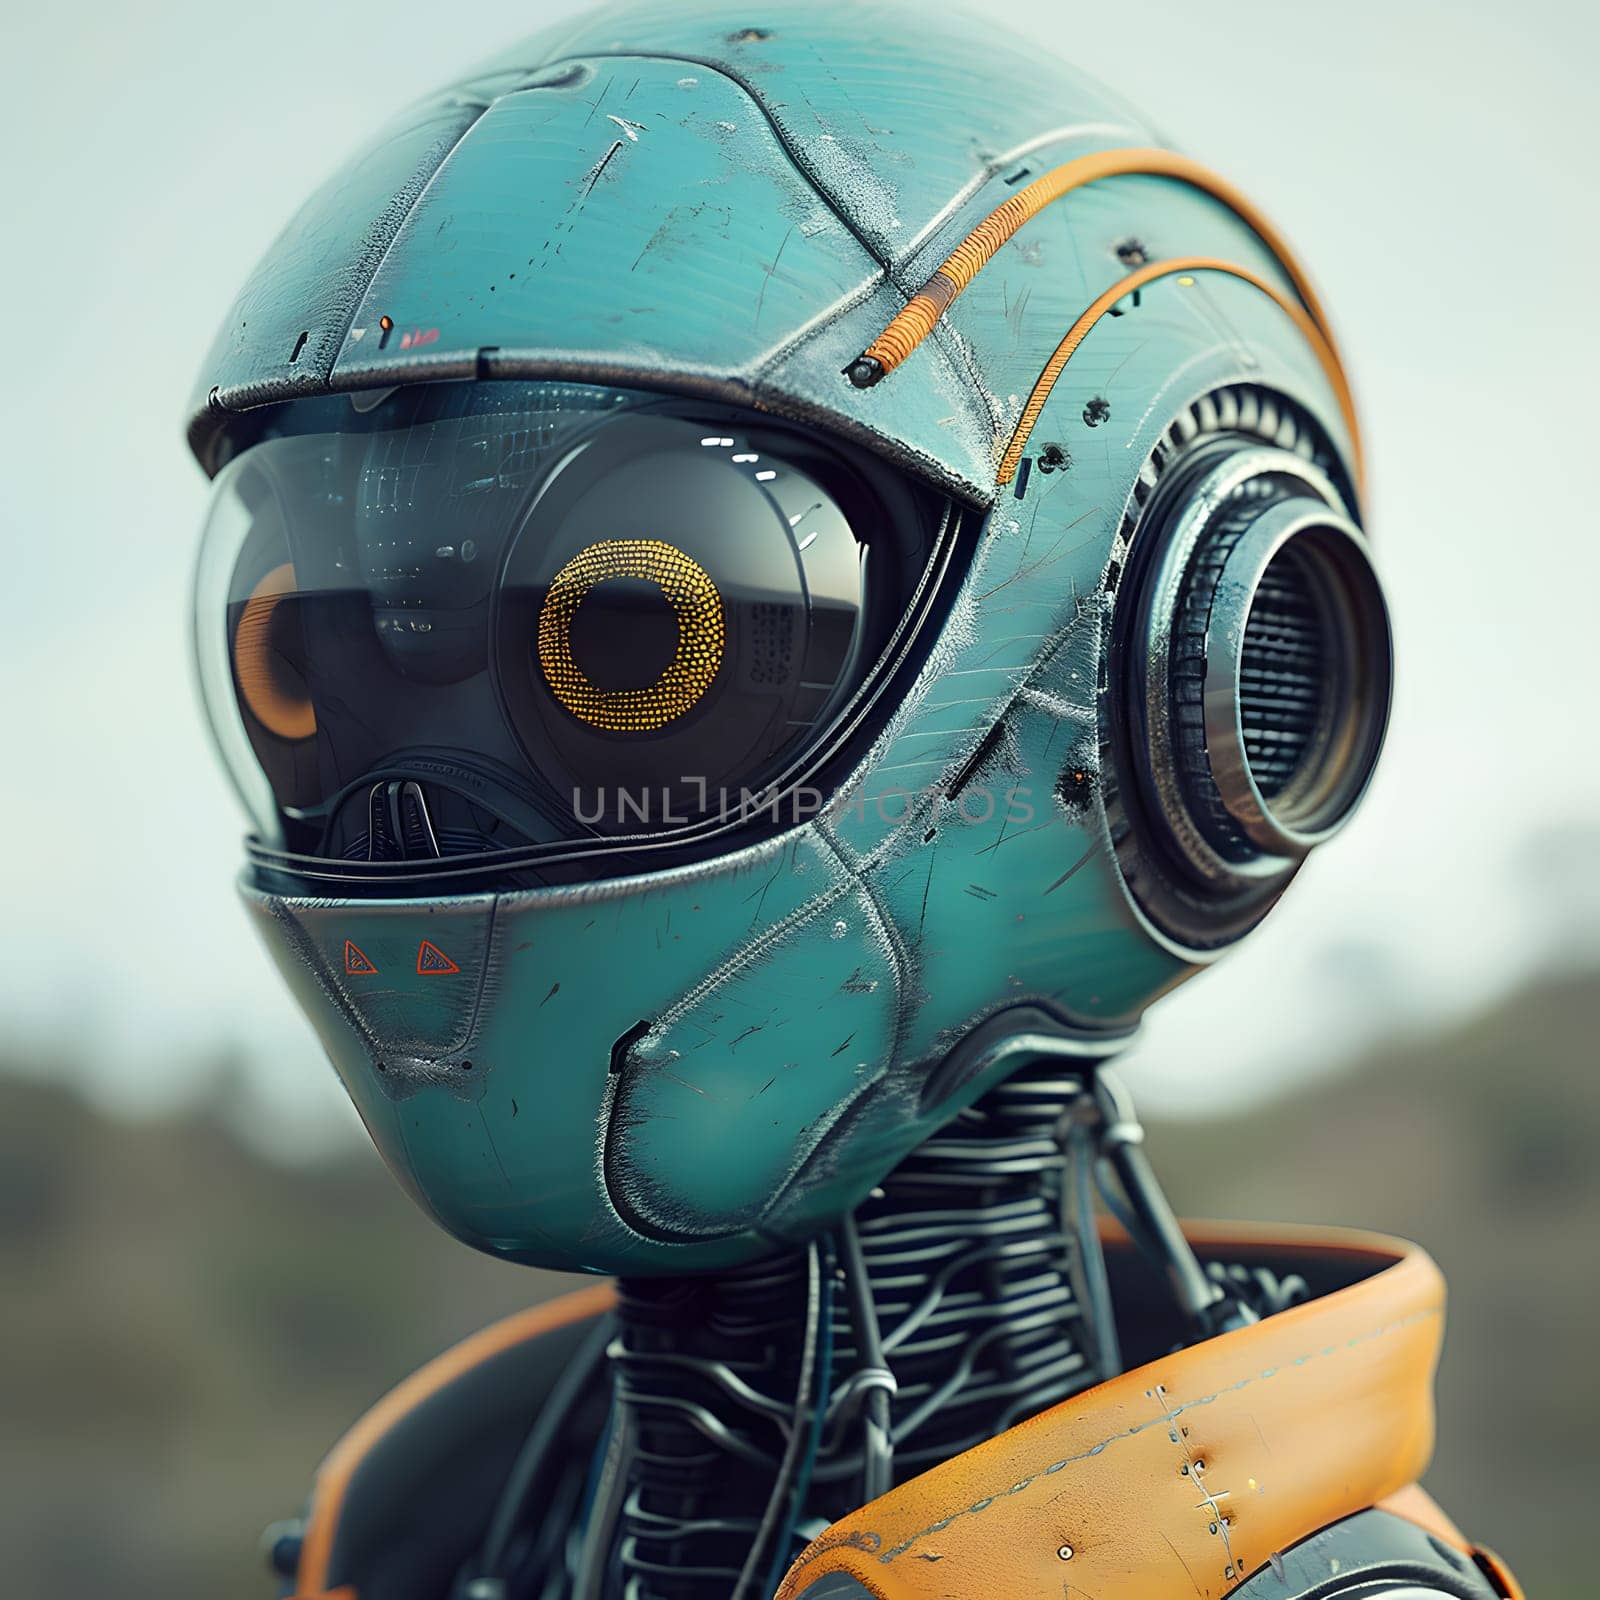 An electric blue robot wearing headgear and headphones gazes at the camera, embodying a fictional character from a futuristic world of machines and technology